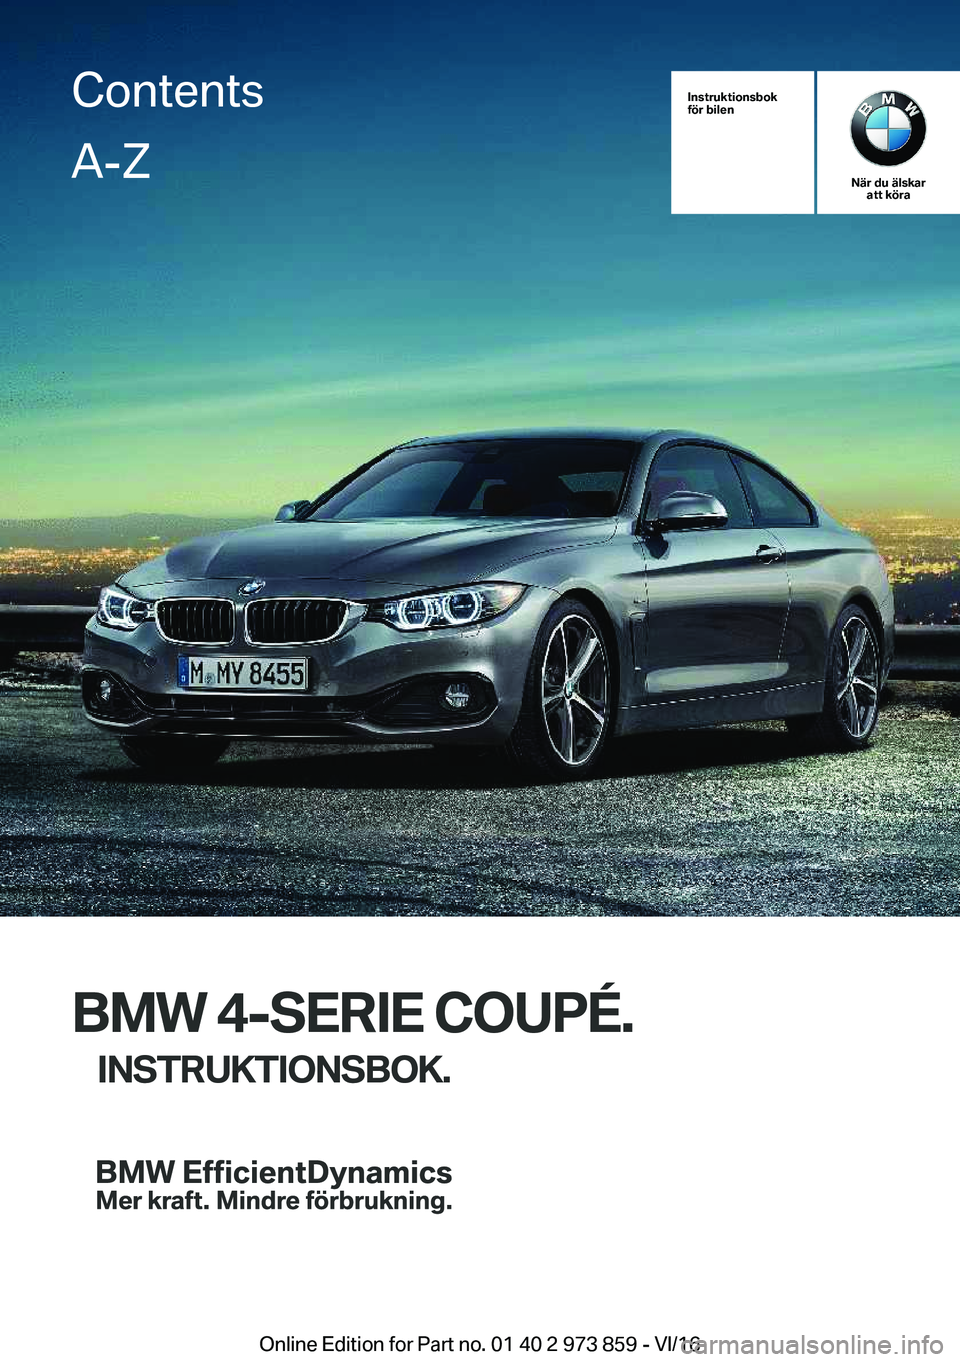 BMW 4 SERIES COUPE 2017  InstruktionsbÖcker (in Swedish) �I�n�s�t�r�u�k�t�i�o�n�s�b�o�k
�f�